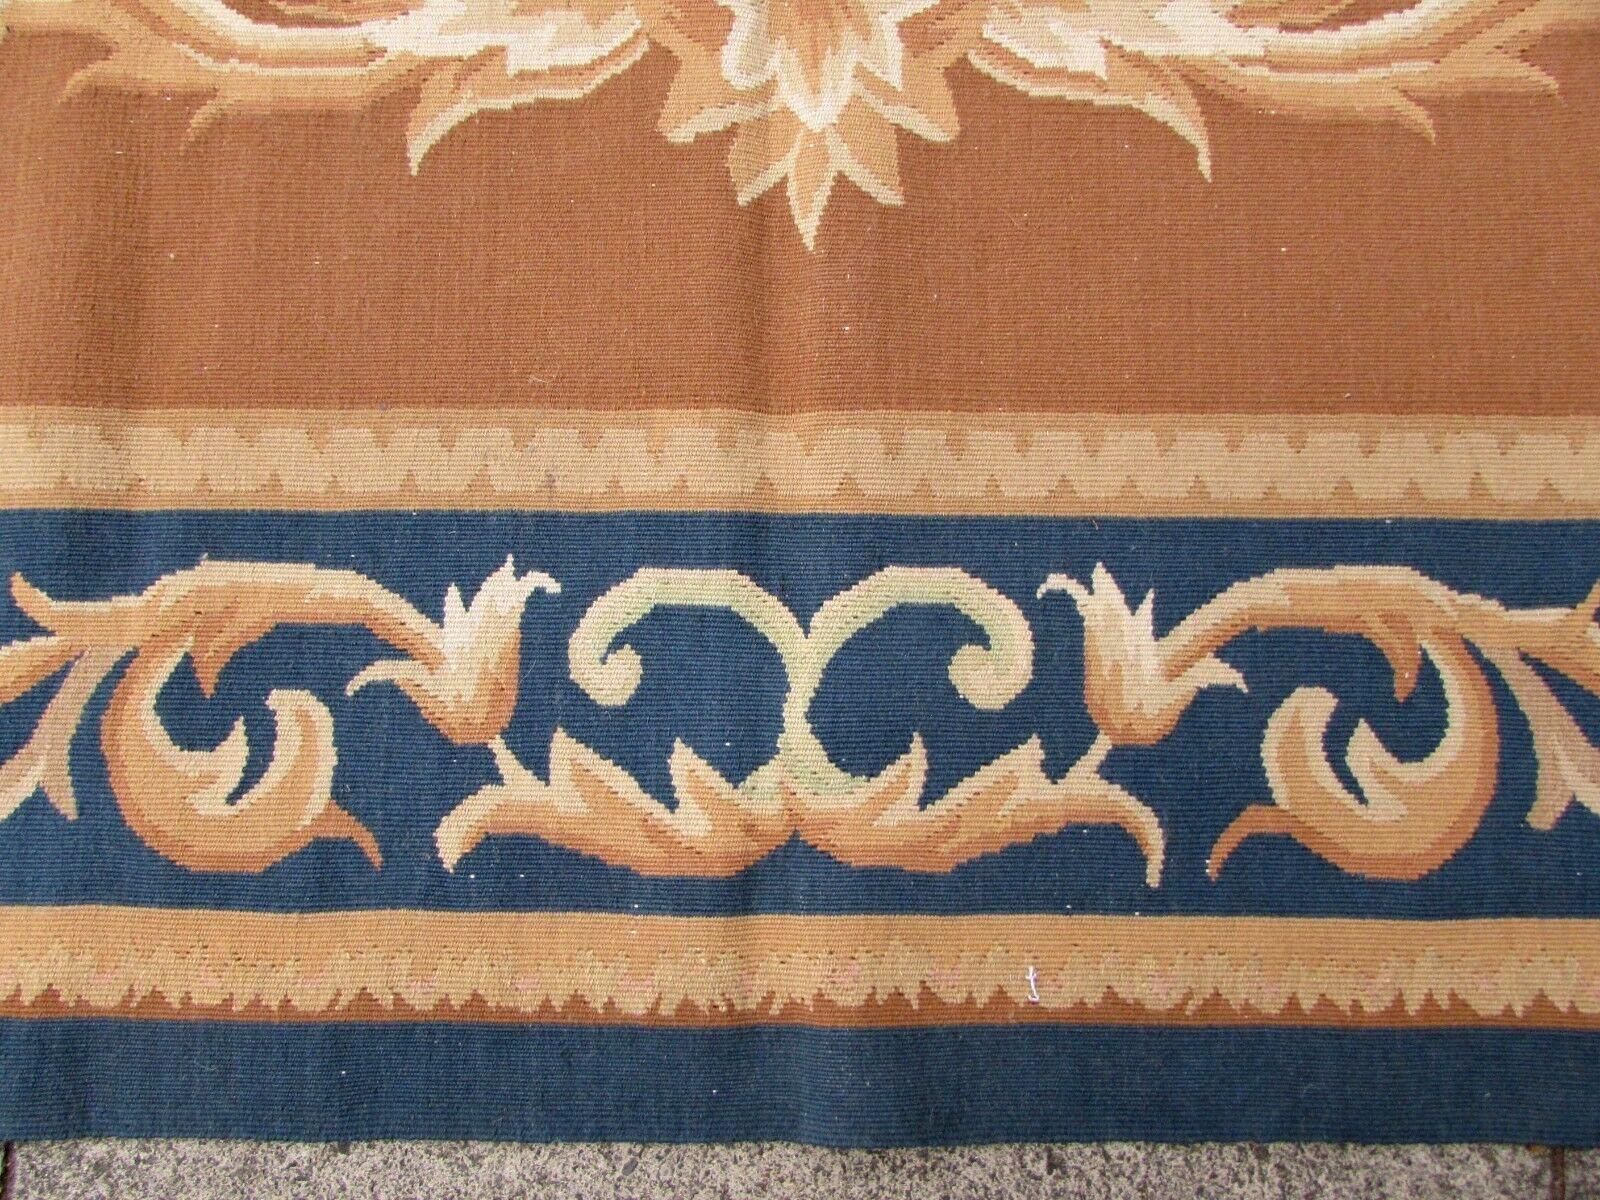 Handmade vintage French Aubusson rug in blue and brown wool. This rug has been made in the end of 20th century in original good condition.

-Condition: Original good,

-circa 1980s,

-Size: 6.8' x 9.9' (209cm x 302cm),

-Material: